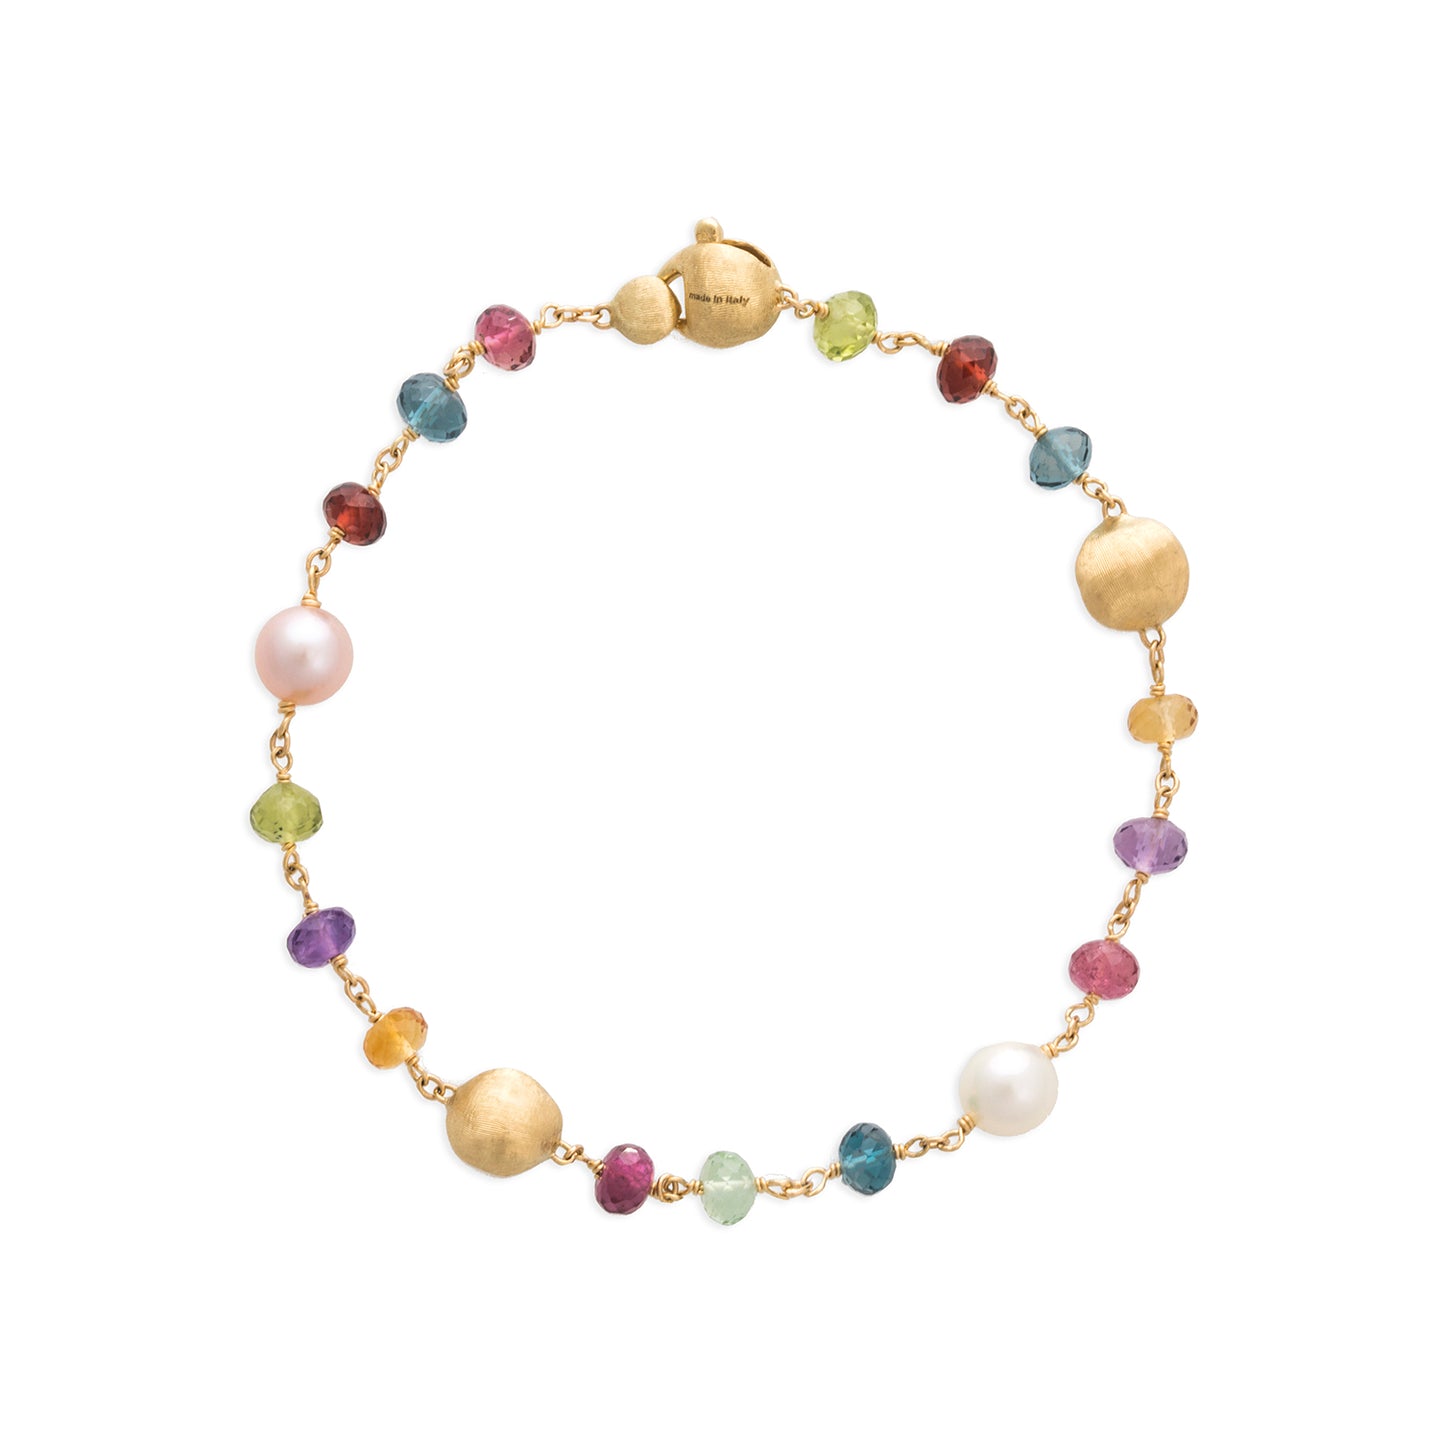 Marco Bicego Africa 18K Yellow Gold Multi-Colored Gemstone and Freshwater Pearl Station Bracelet